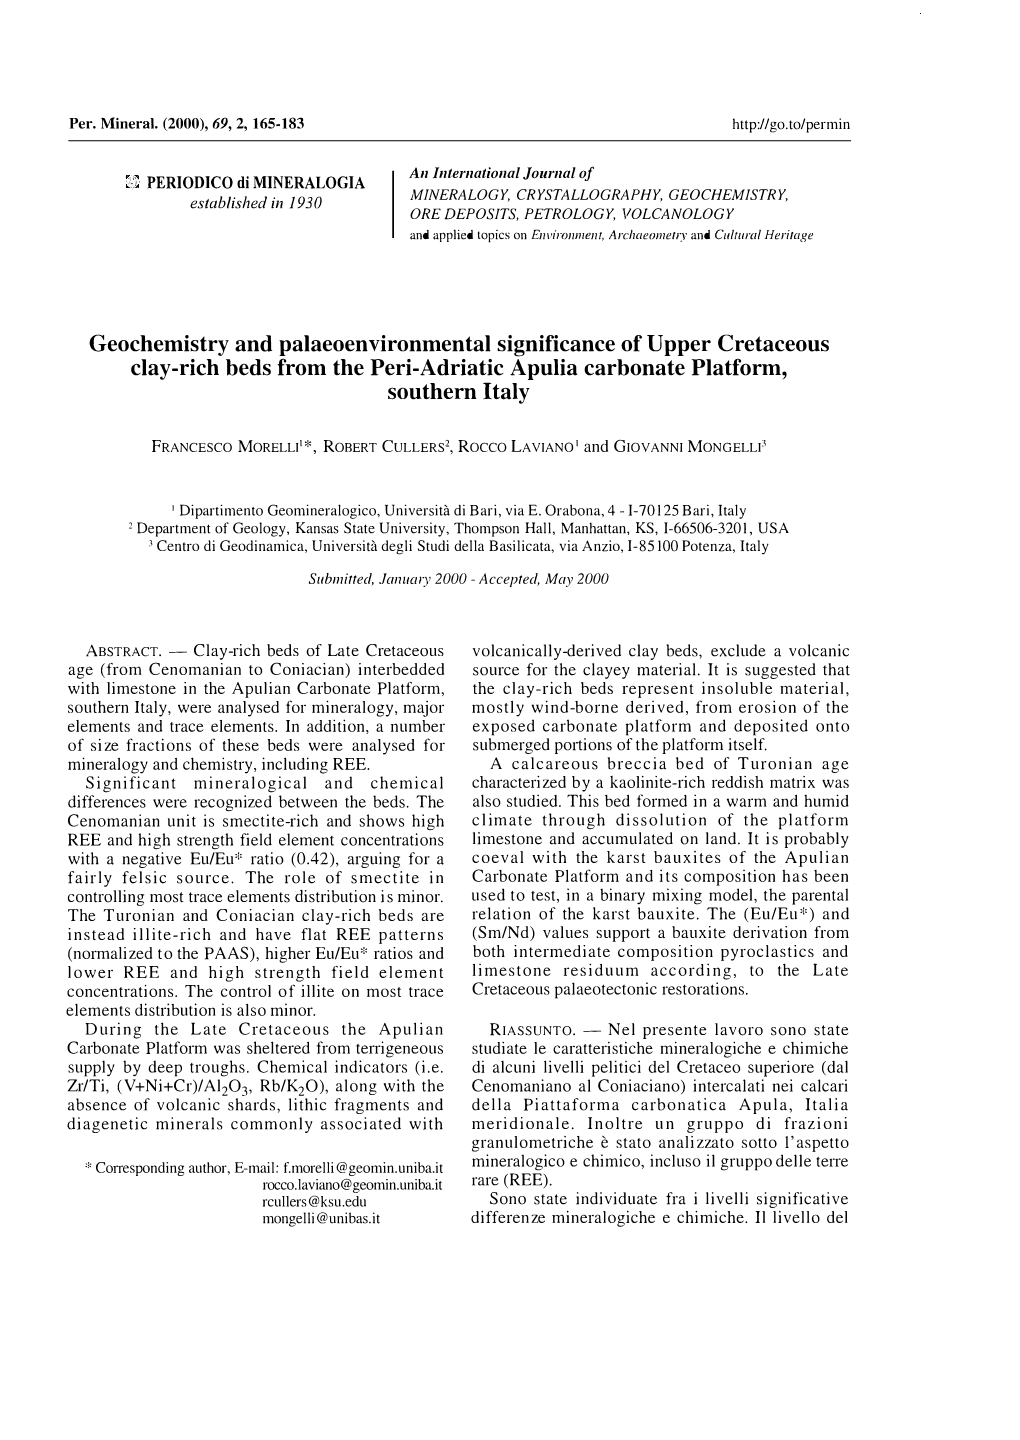 An International Journal of Geochemistry and Palaeoenvironmental Significance of Upper Cretaceous Clay-Rich Beds from the Peri-A